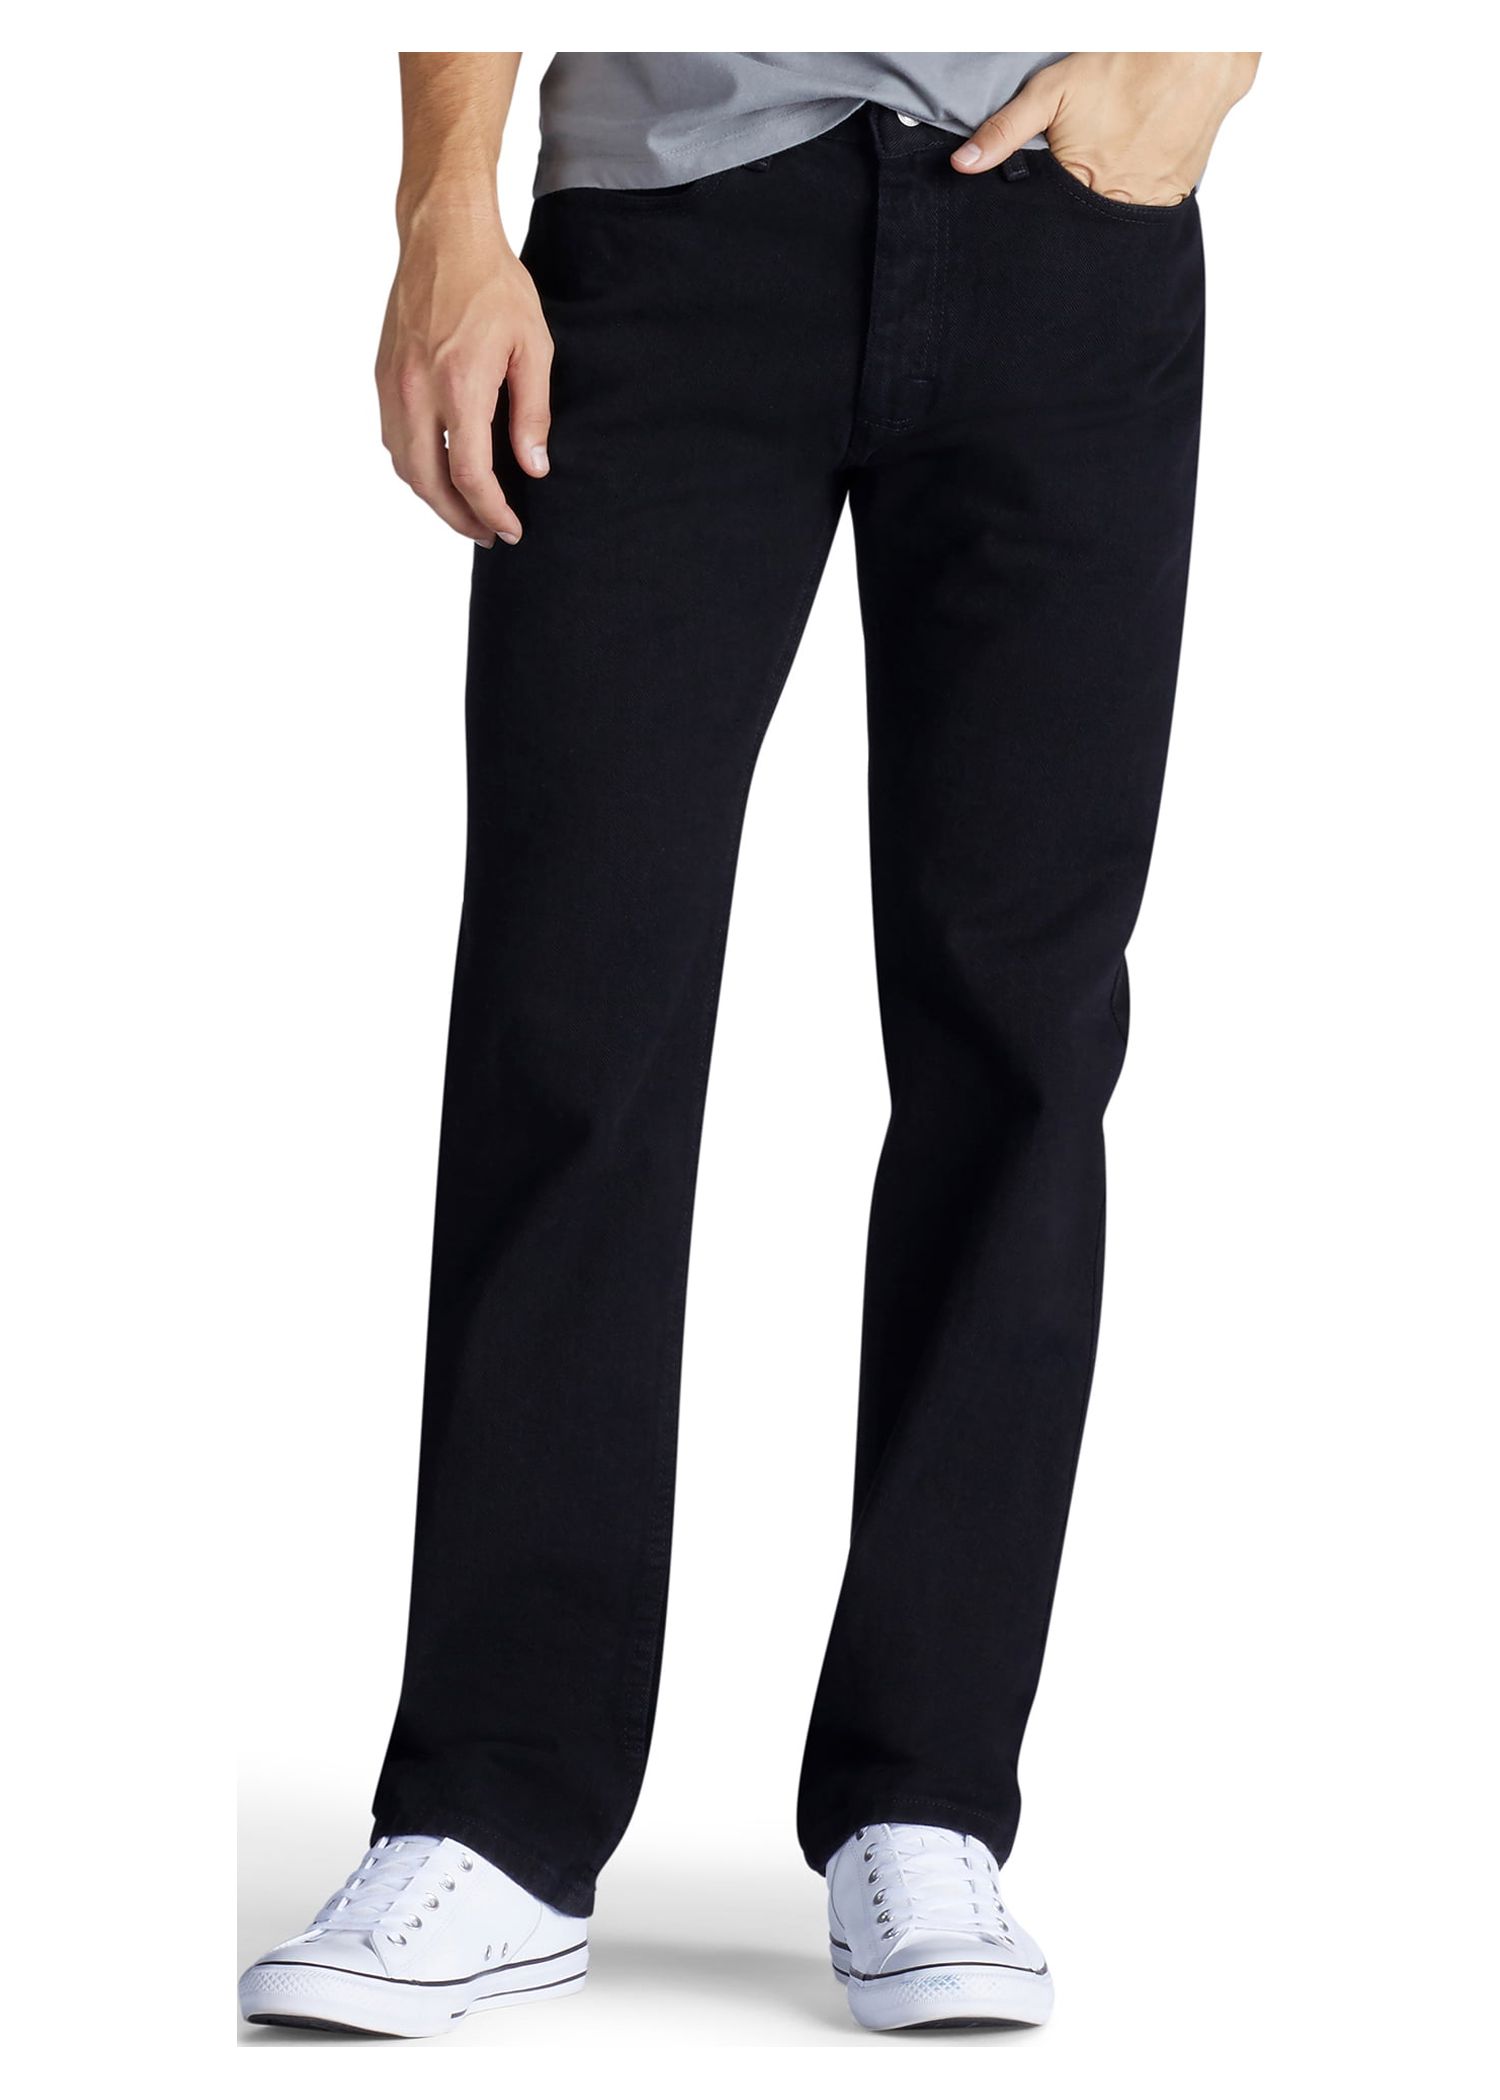 Lee Men's Relaxed Fit Jeans - image 1 of 4